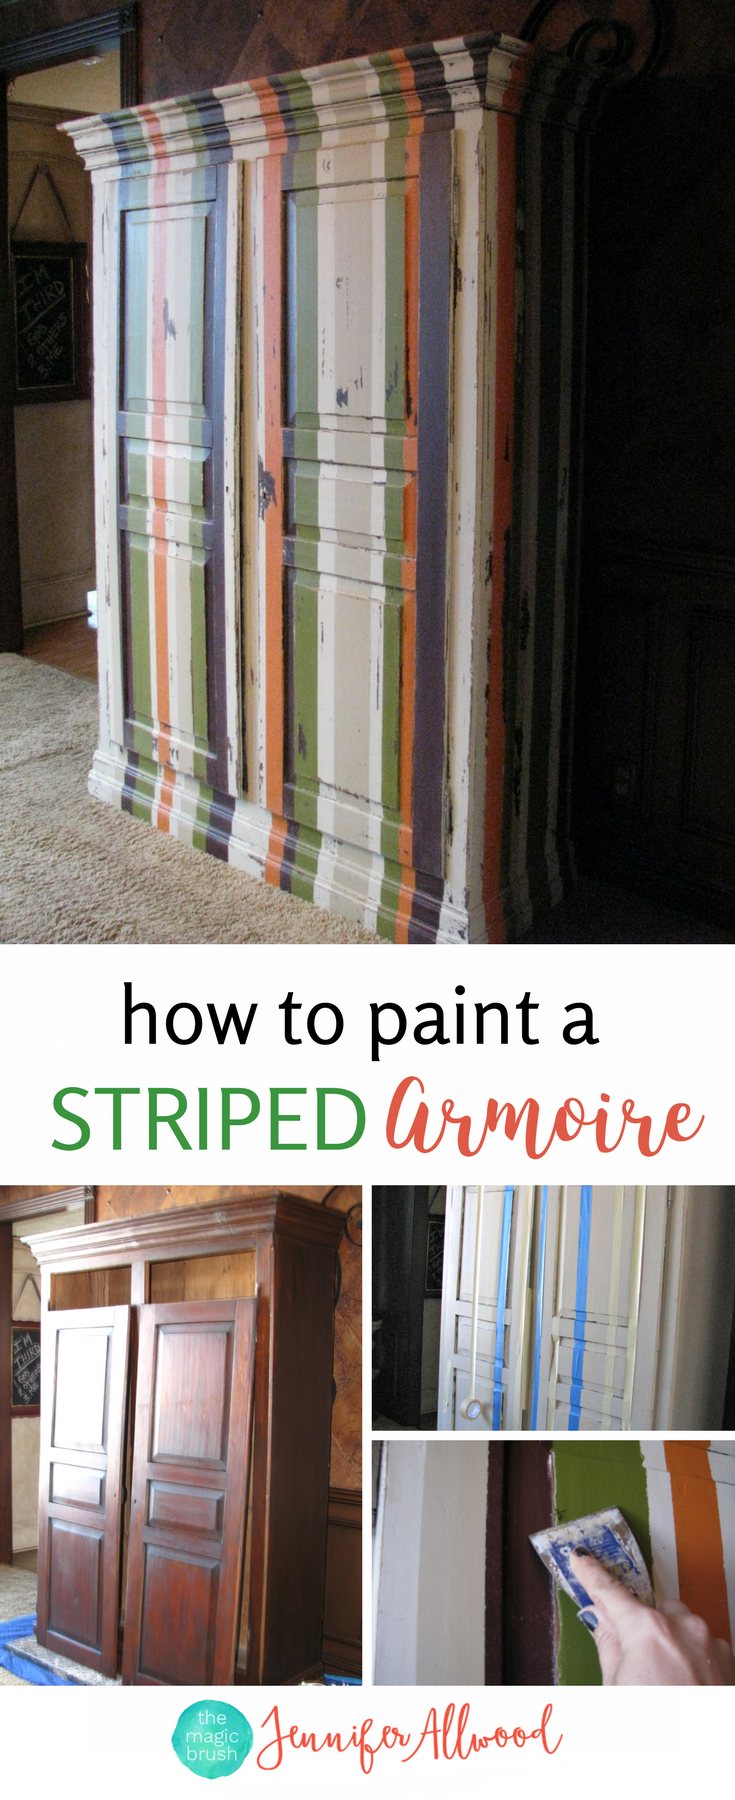 How to Painted A Striped Armoire for a Boys Nursery | Jennifer Allwood | Painted Furniture Ideas | Painted Wardrobe